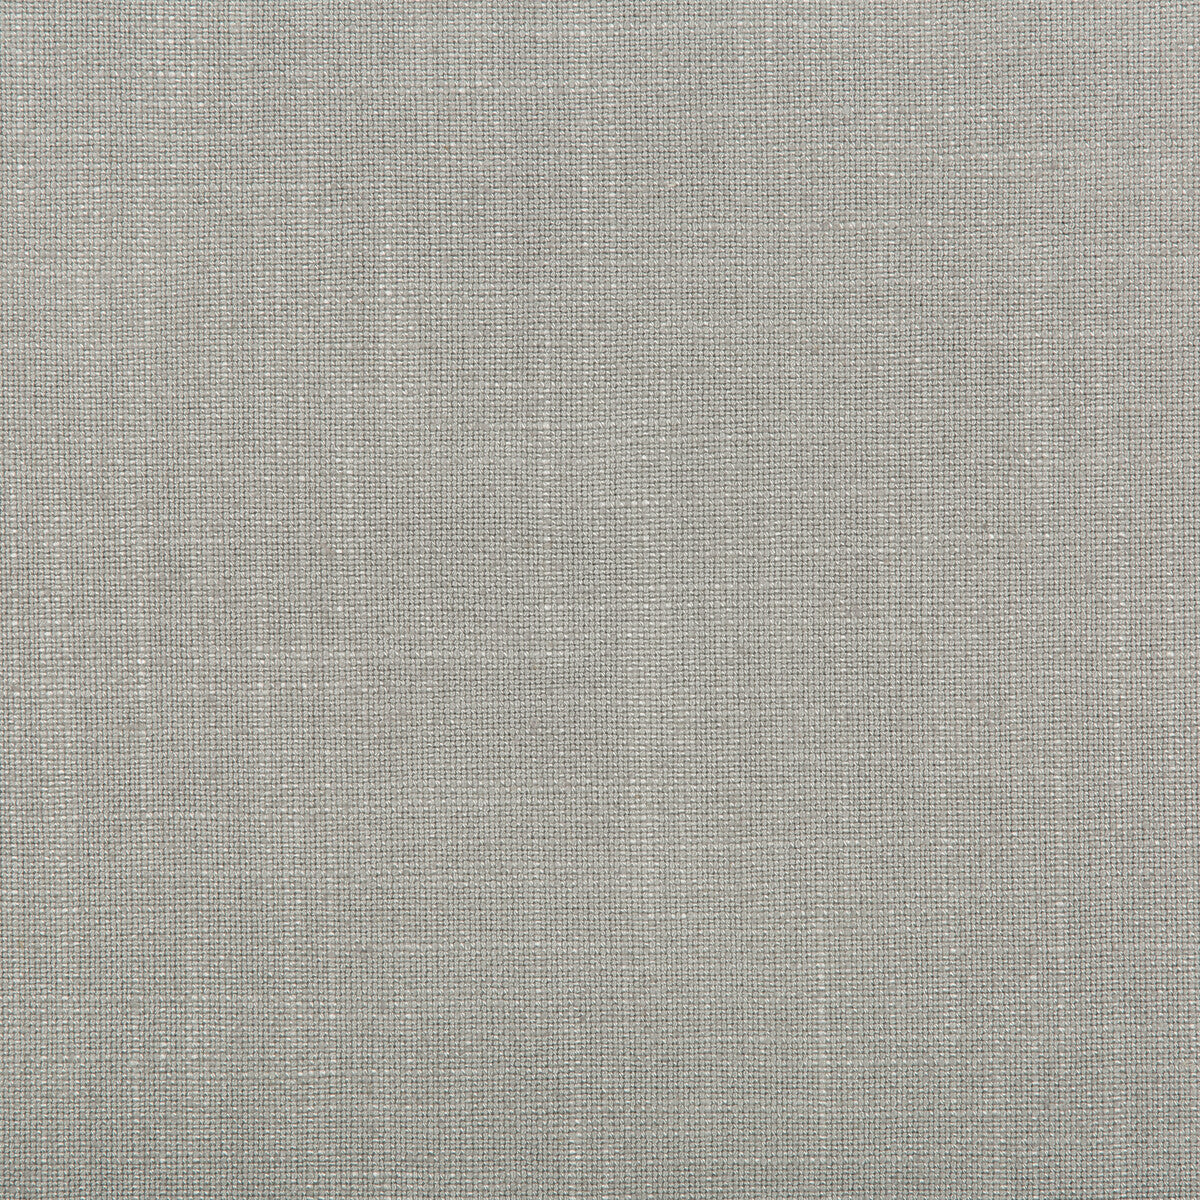 Aura fabric in dove color - pattern 35520.11.0 - by Kravet Design